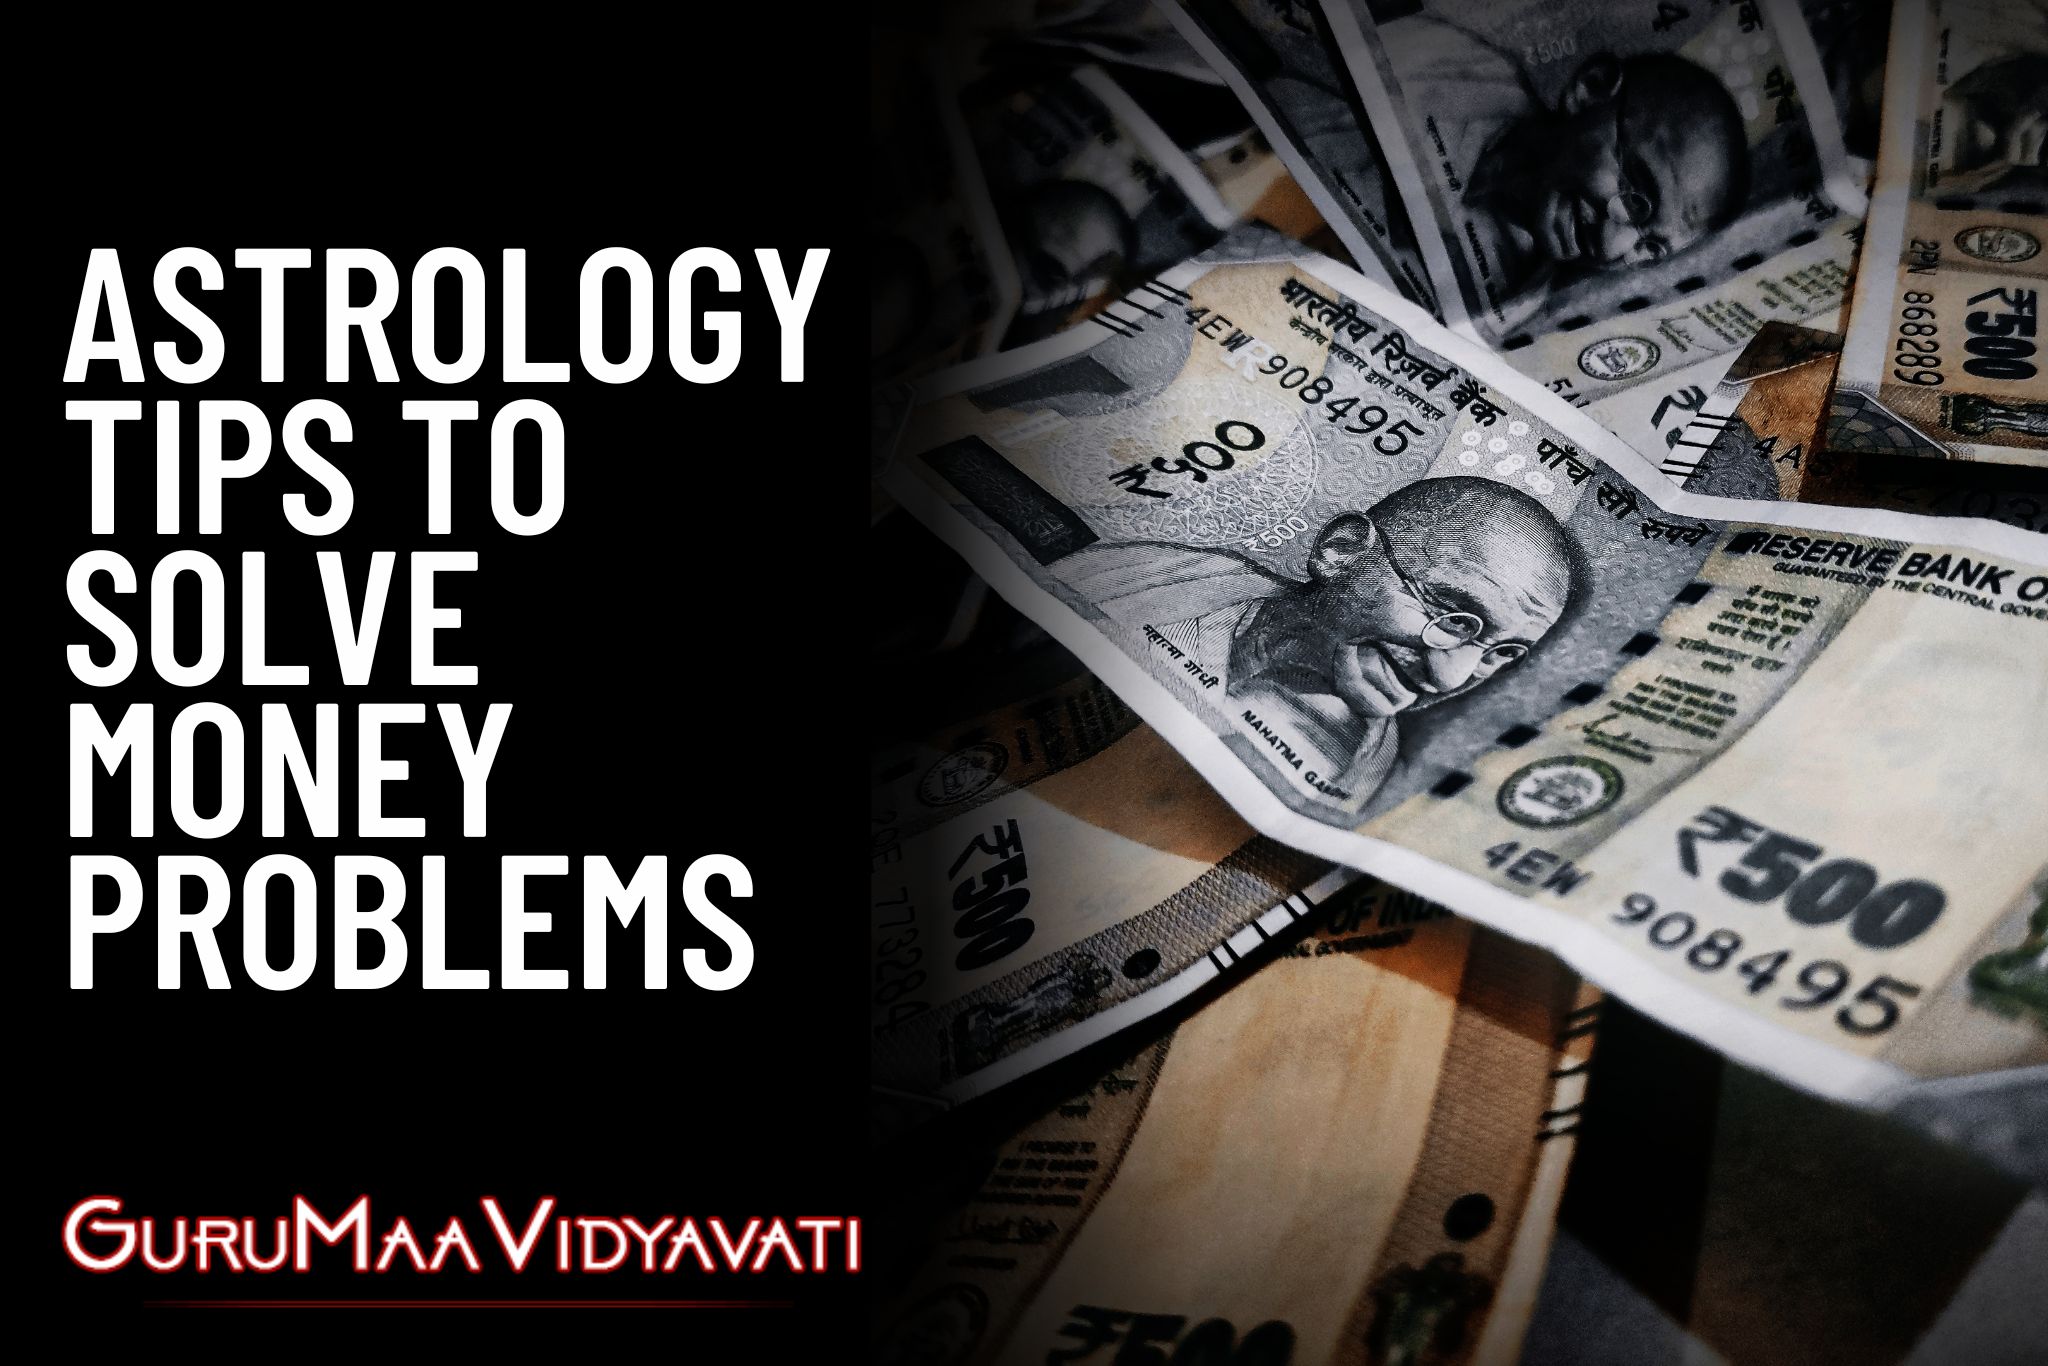 6 Astrology Tips to Solve Money Problems